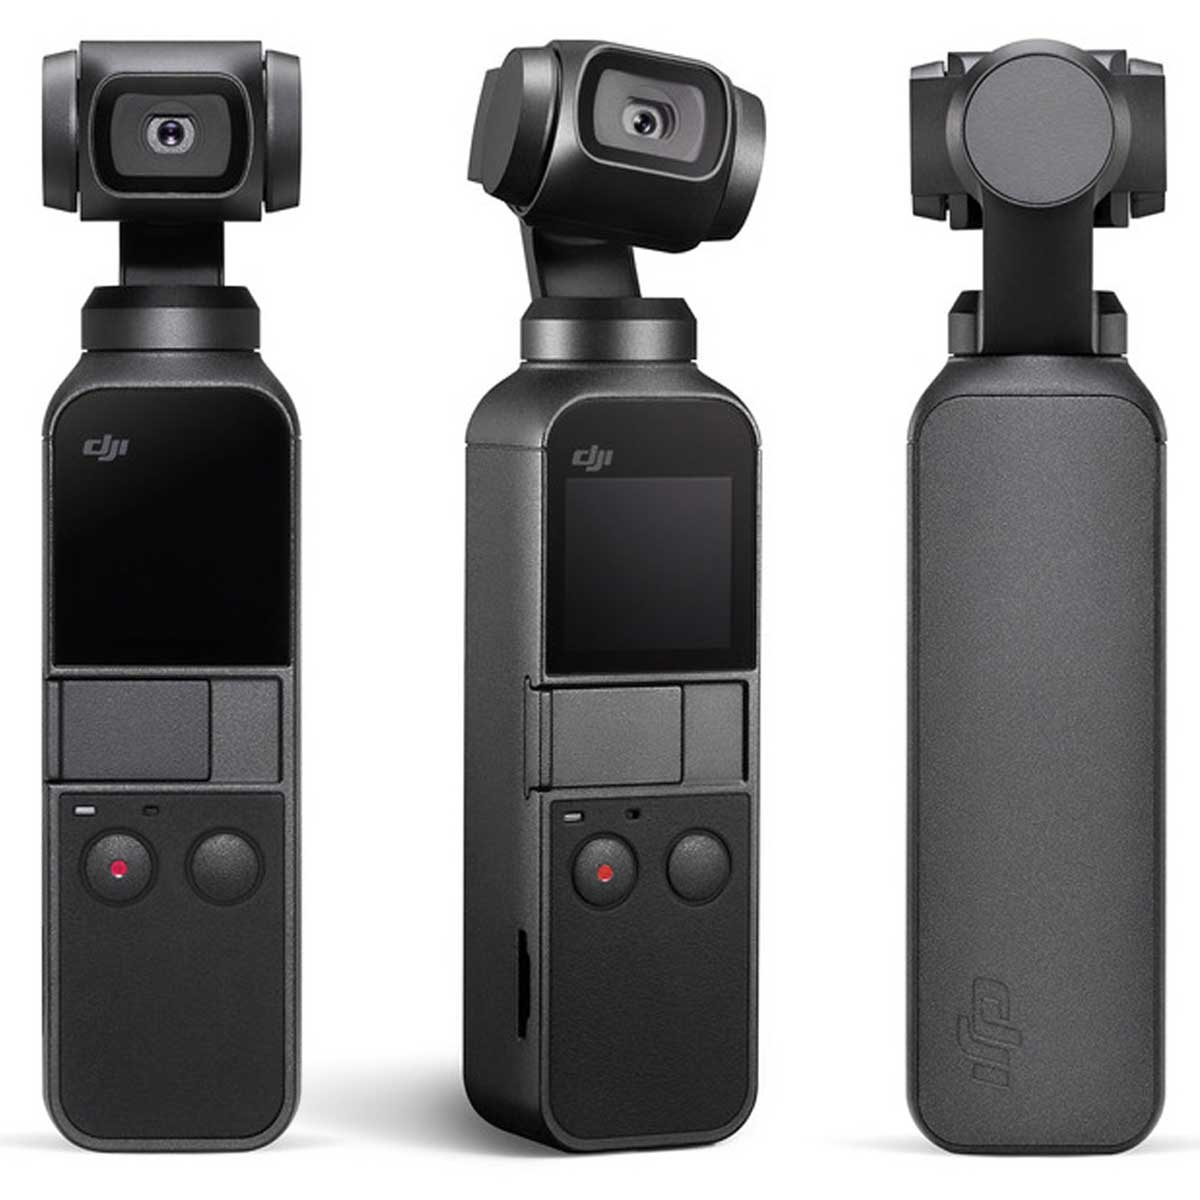 DJI Osmo 3 Axis Gimbal Stabilizer with Camera Official JaYoe website